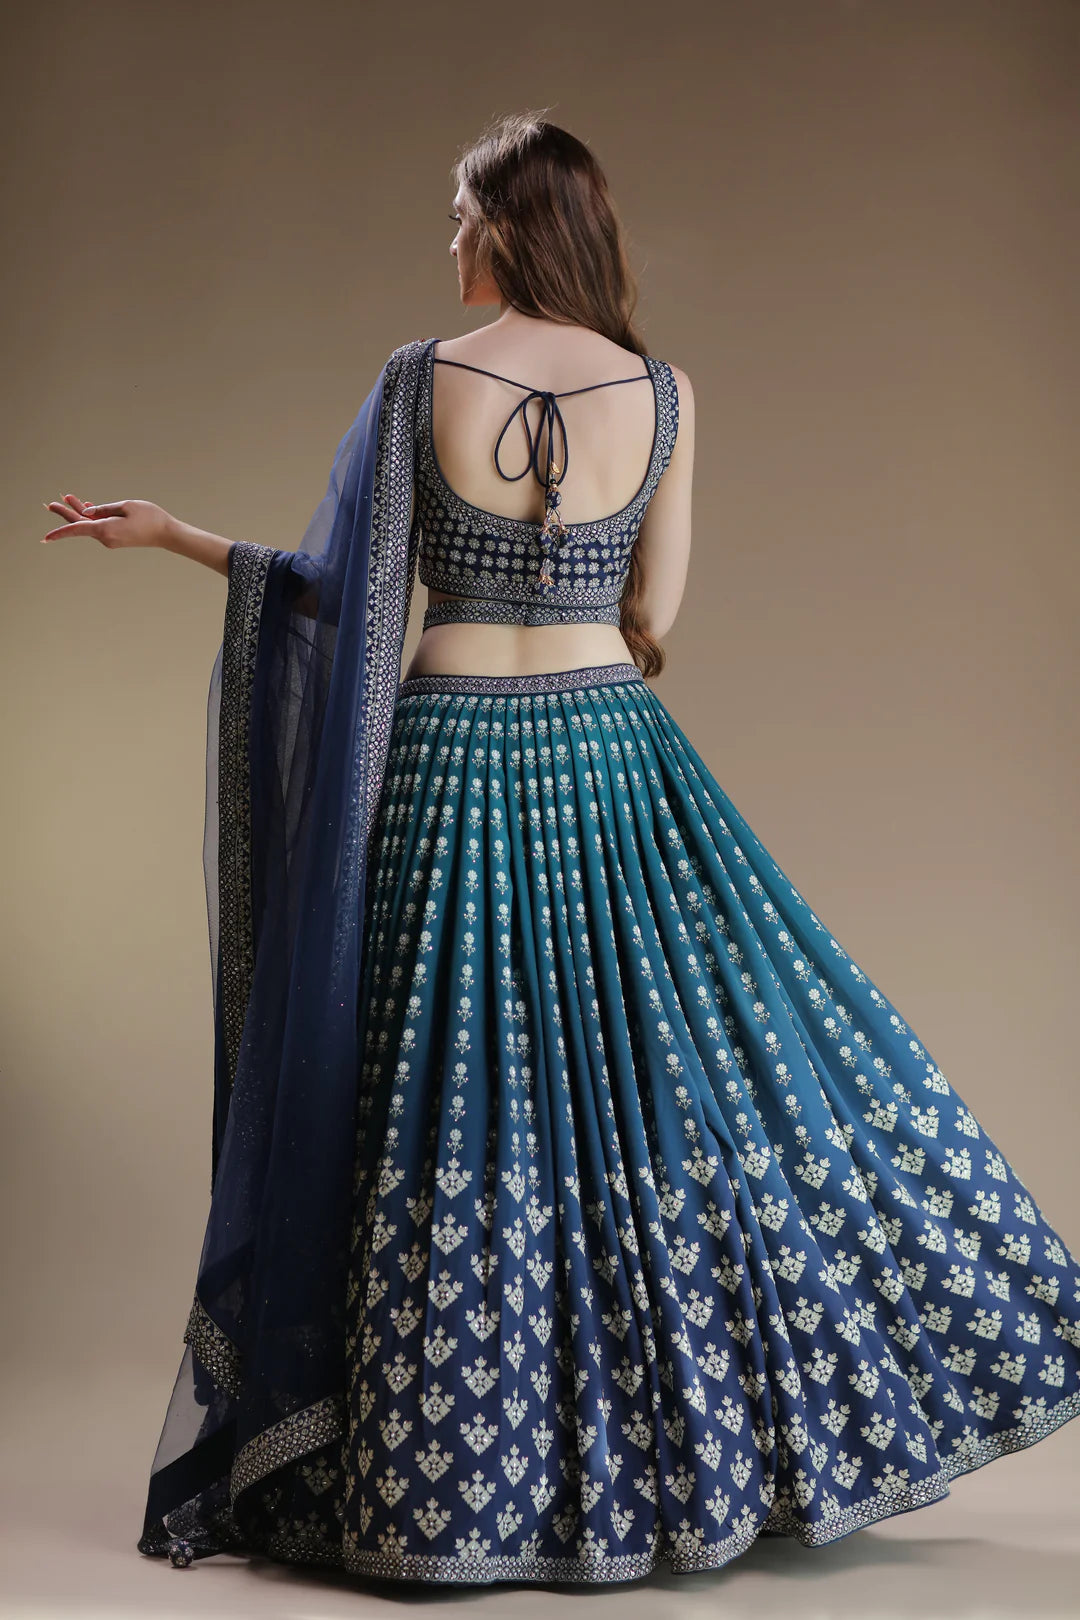 A lehenga with a cheeky cut and a navy blue color.